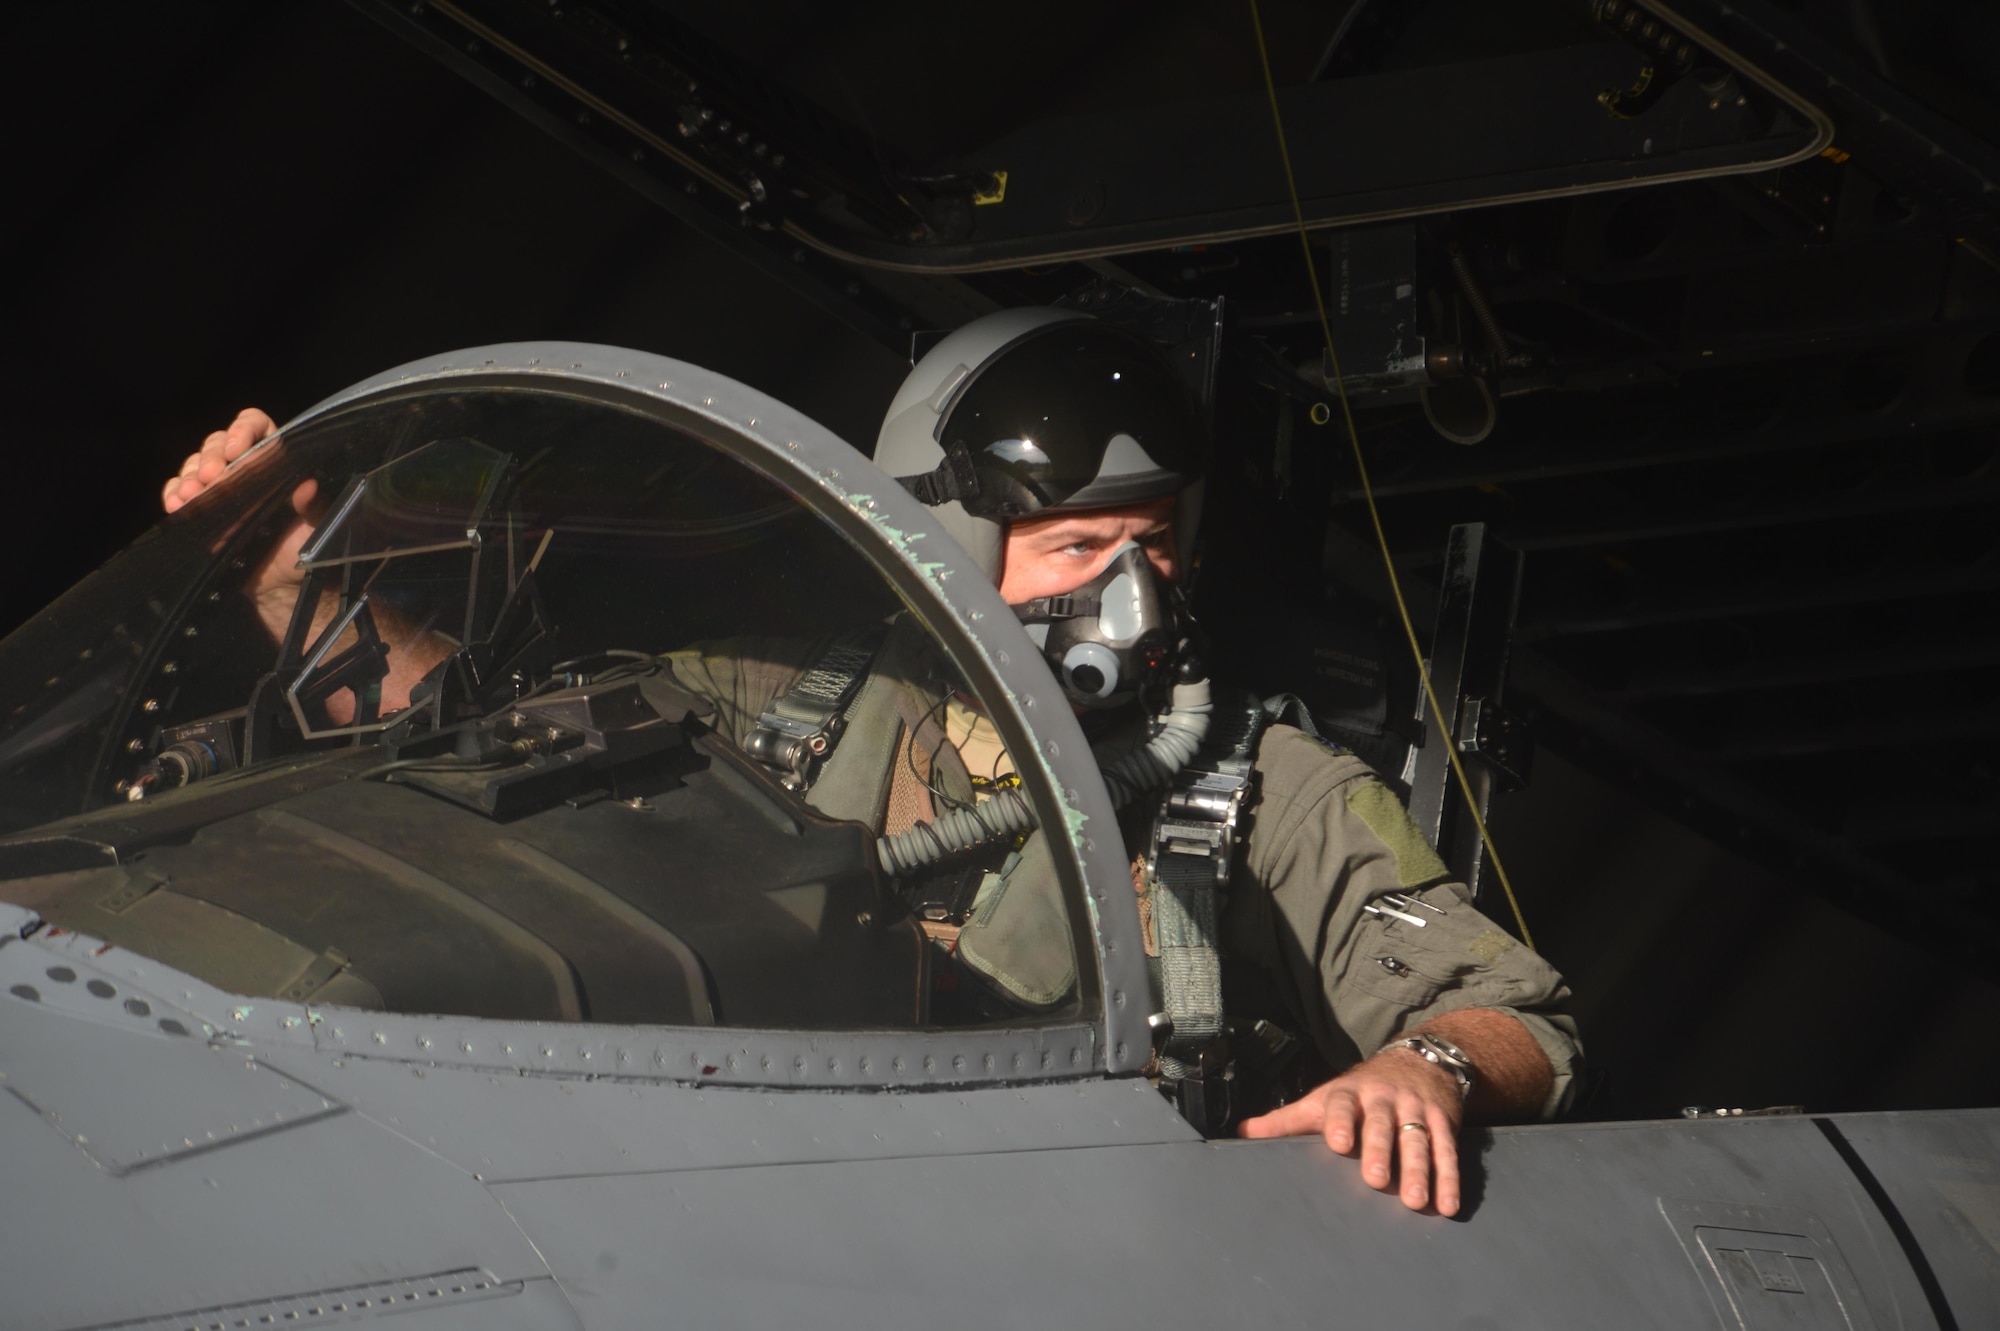 A 493rd Fighter Squadron pilot completes pre-flight checks prior to departing Royal Air Force Lakenheath, England, Aug. 29, 2017. During a deployment to support the NATO Baltic Air Policing peacetime collective defense mission, U.S. Airmen will continue to build upon shared values, experiences and vision to strengthen the bond between Baltic allies through shared capabilities and coordinated efforts to effectively accomplish missions. (U.S. Air Force photo/Master Sgt. Eric Burks)